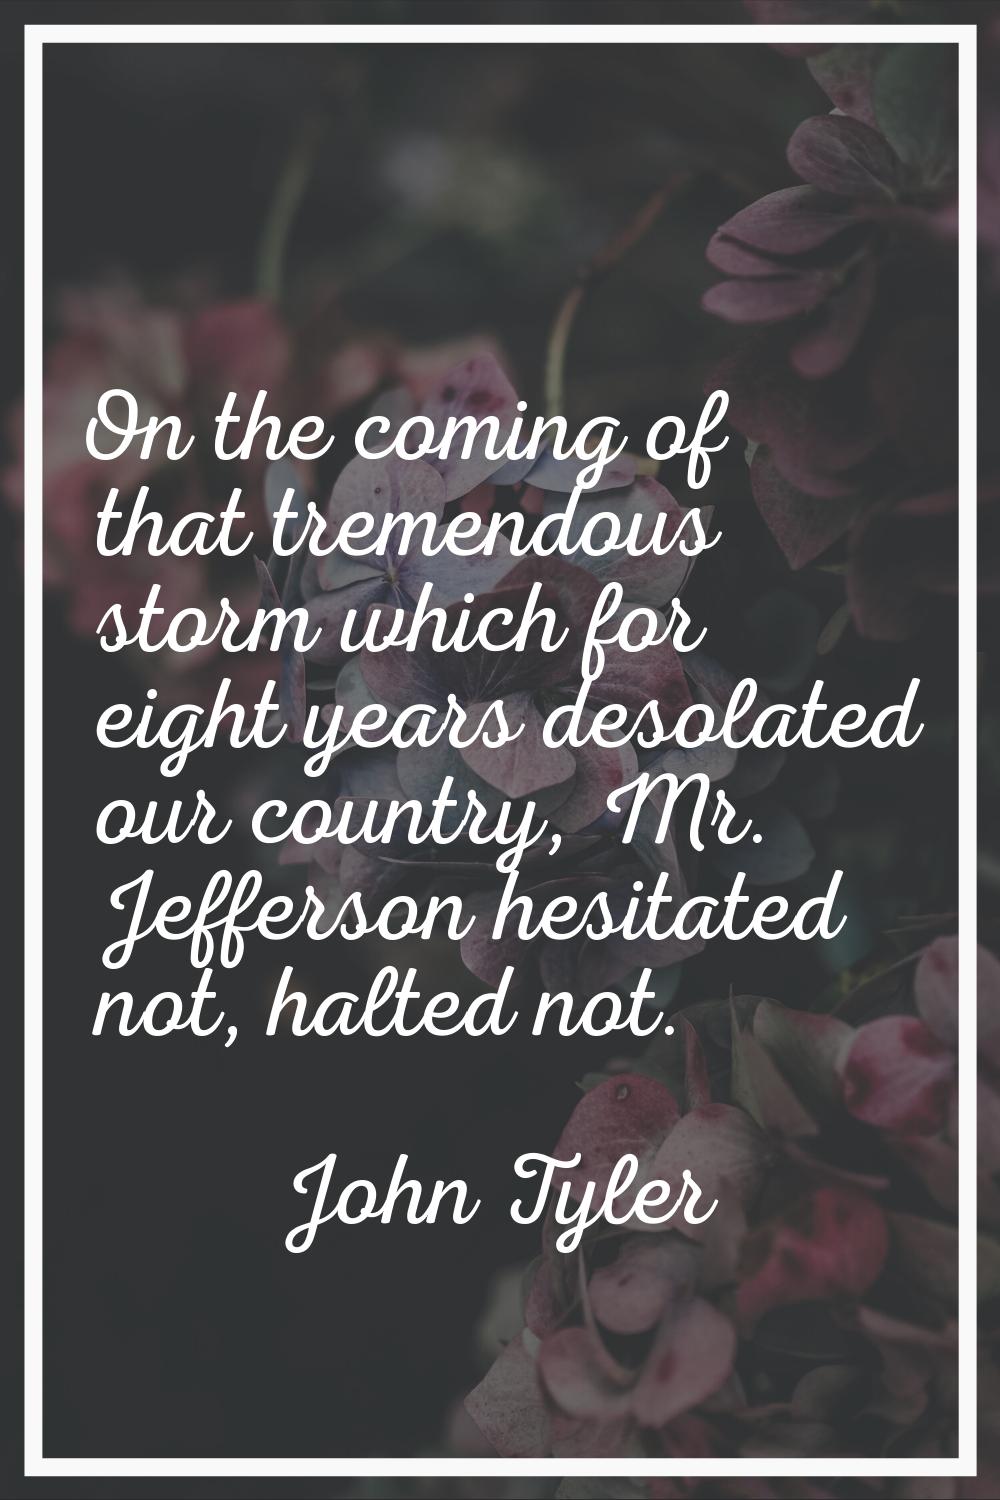 On the coming of that tremendous storm which for eight years desolated our country, Mr. Jefferson h